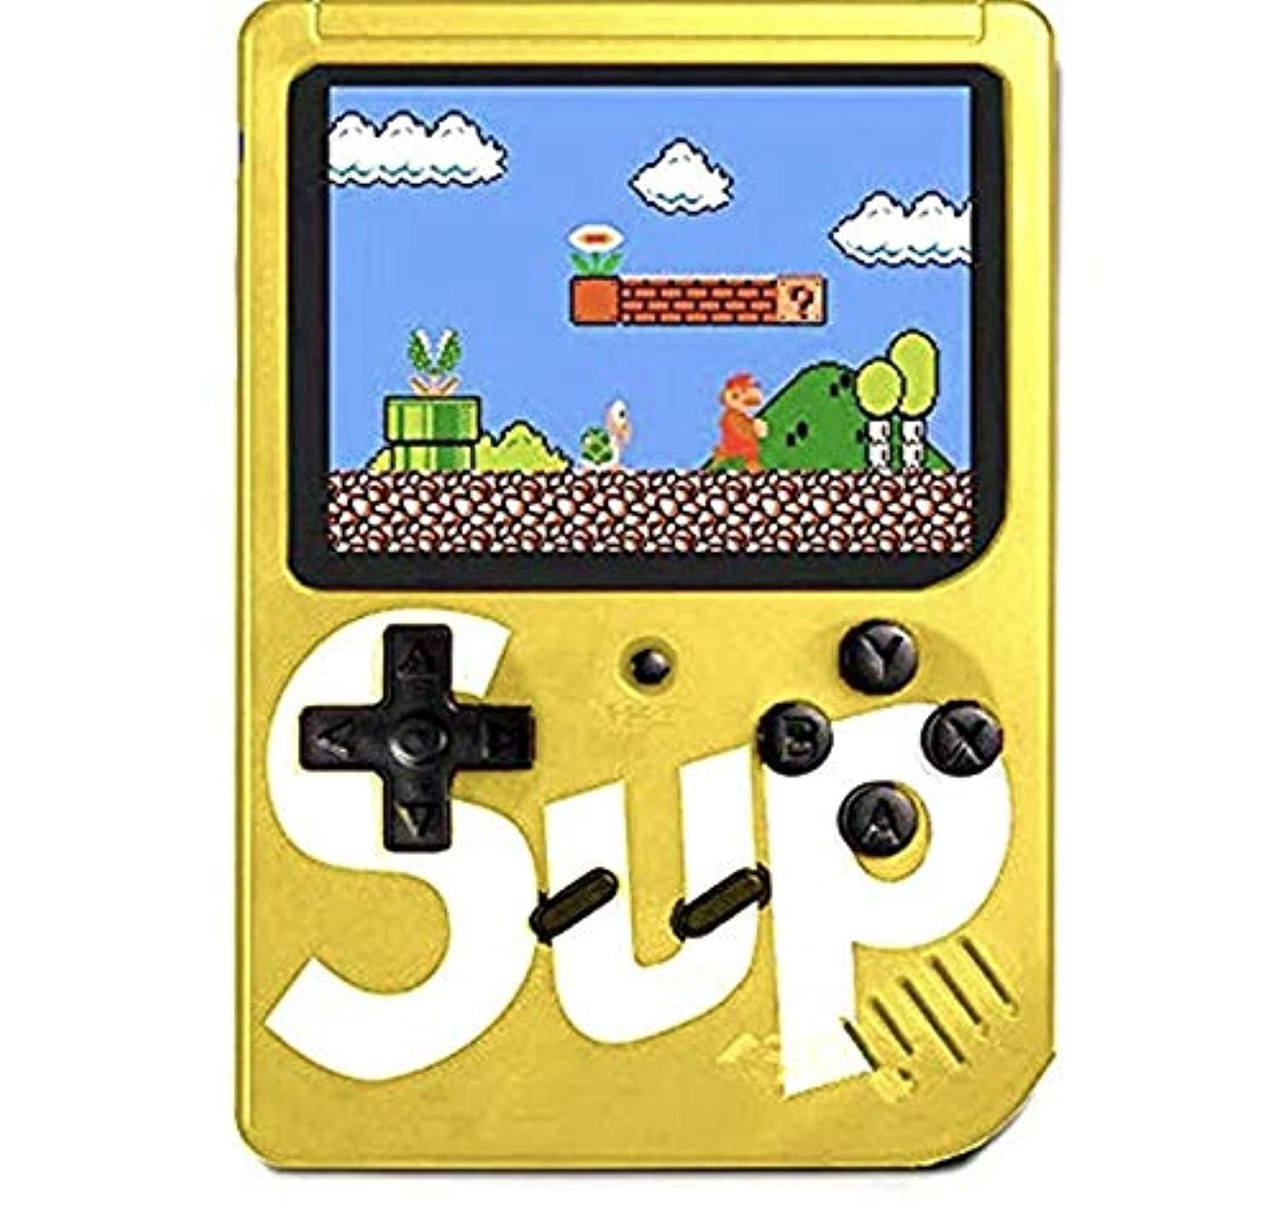 SUP Game Box Plus 400 in 1 Retro Games UPGRADED VERSION mini Portable  Console - Yellow, LC-GMBOX-YL, AYOUB COMPUTERS